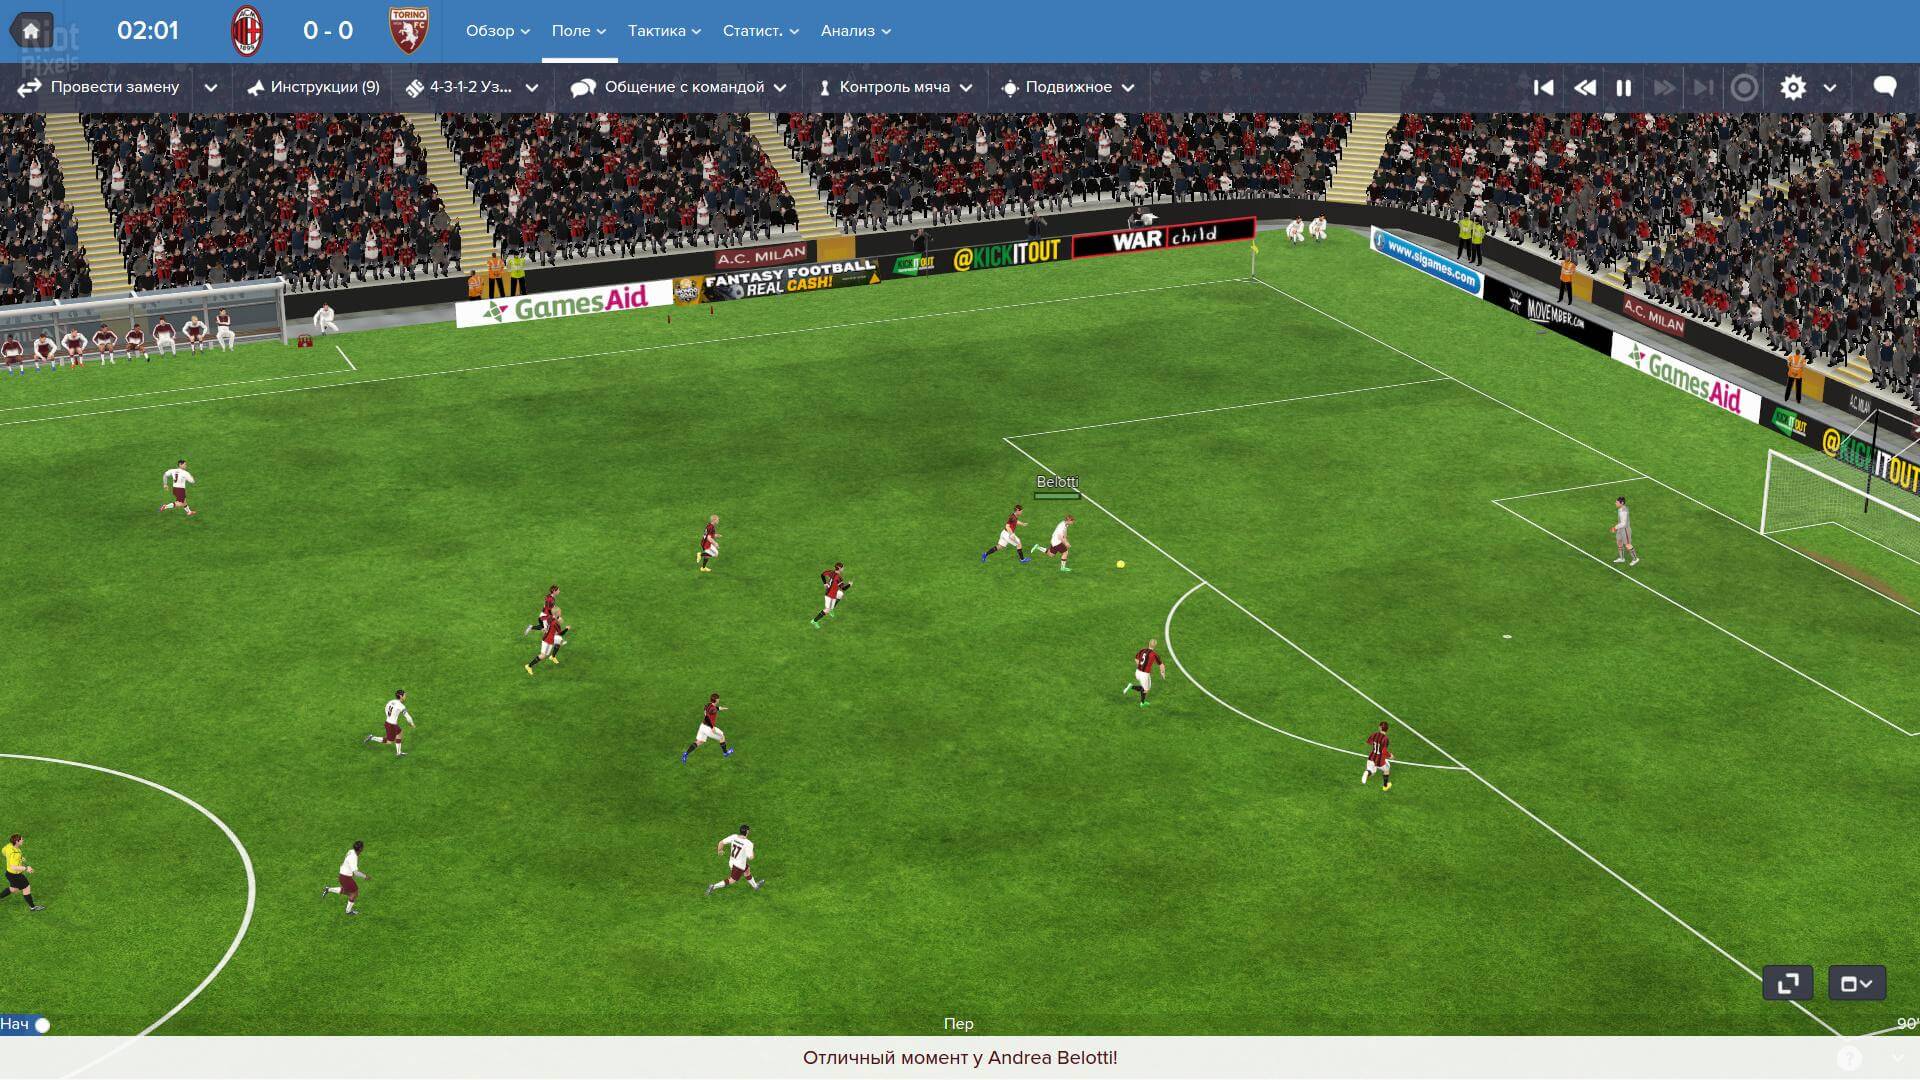 football manager 2016 specs